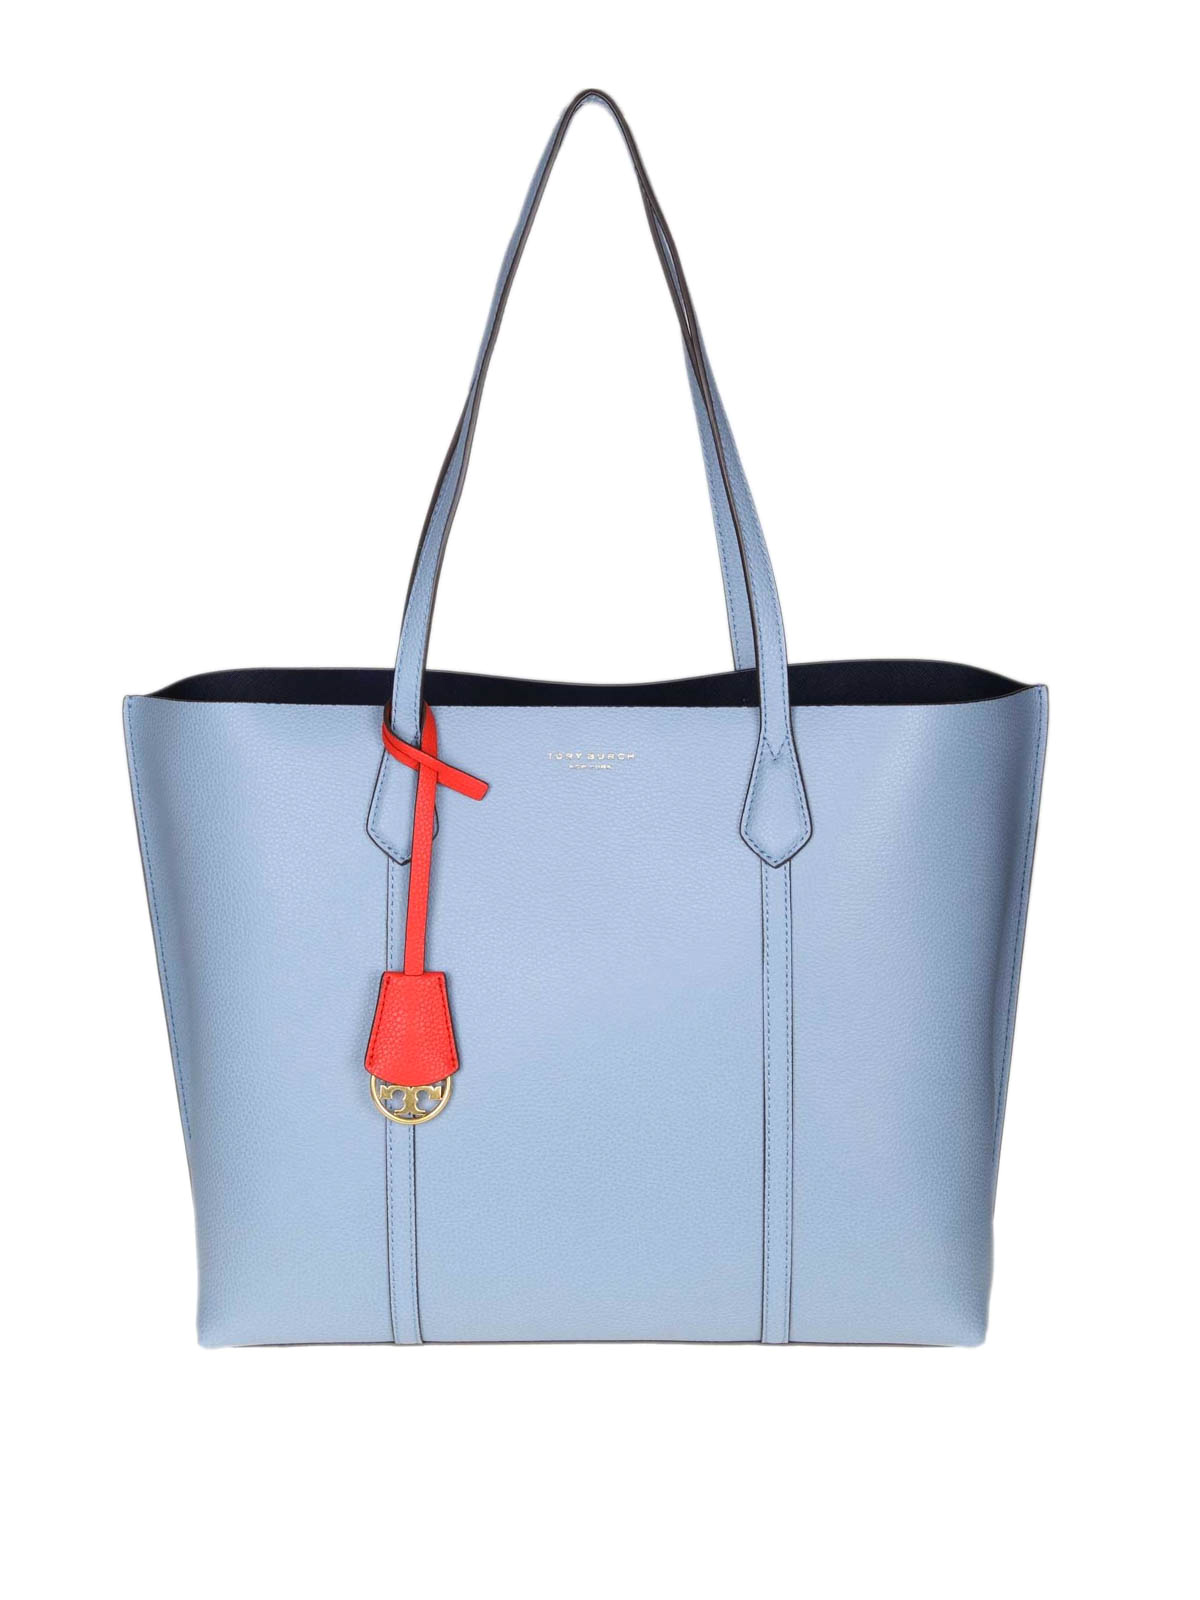 Totes bags Tory Burch - Perry triple compartment light blue tote - 53245432